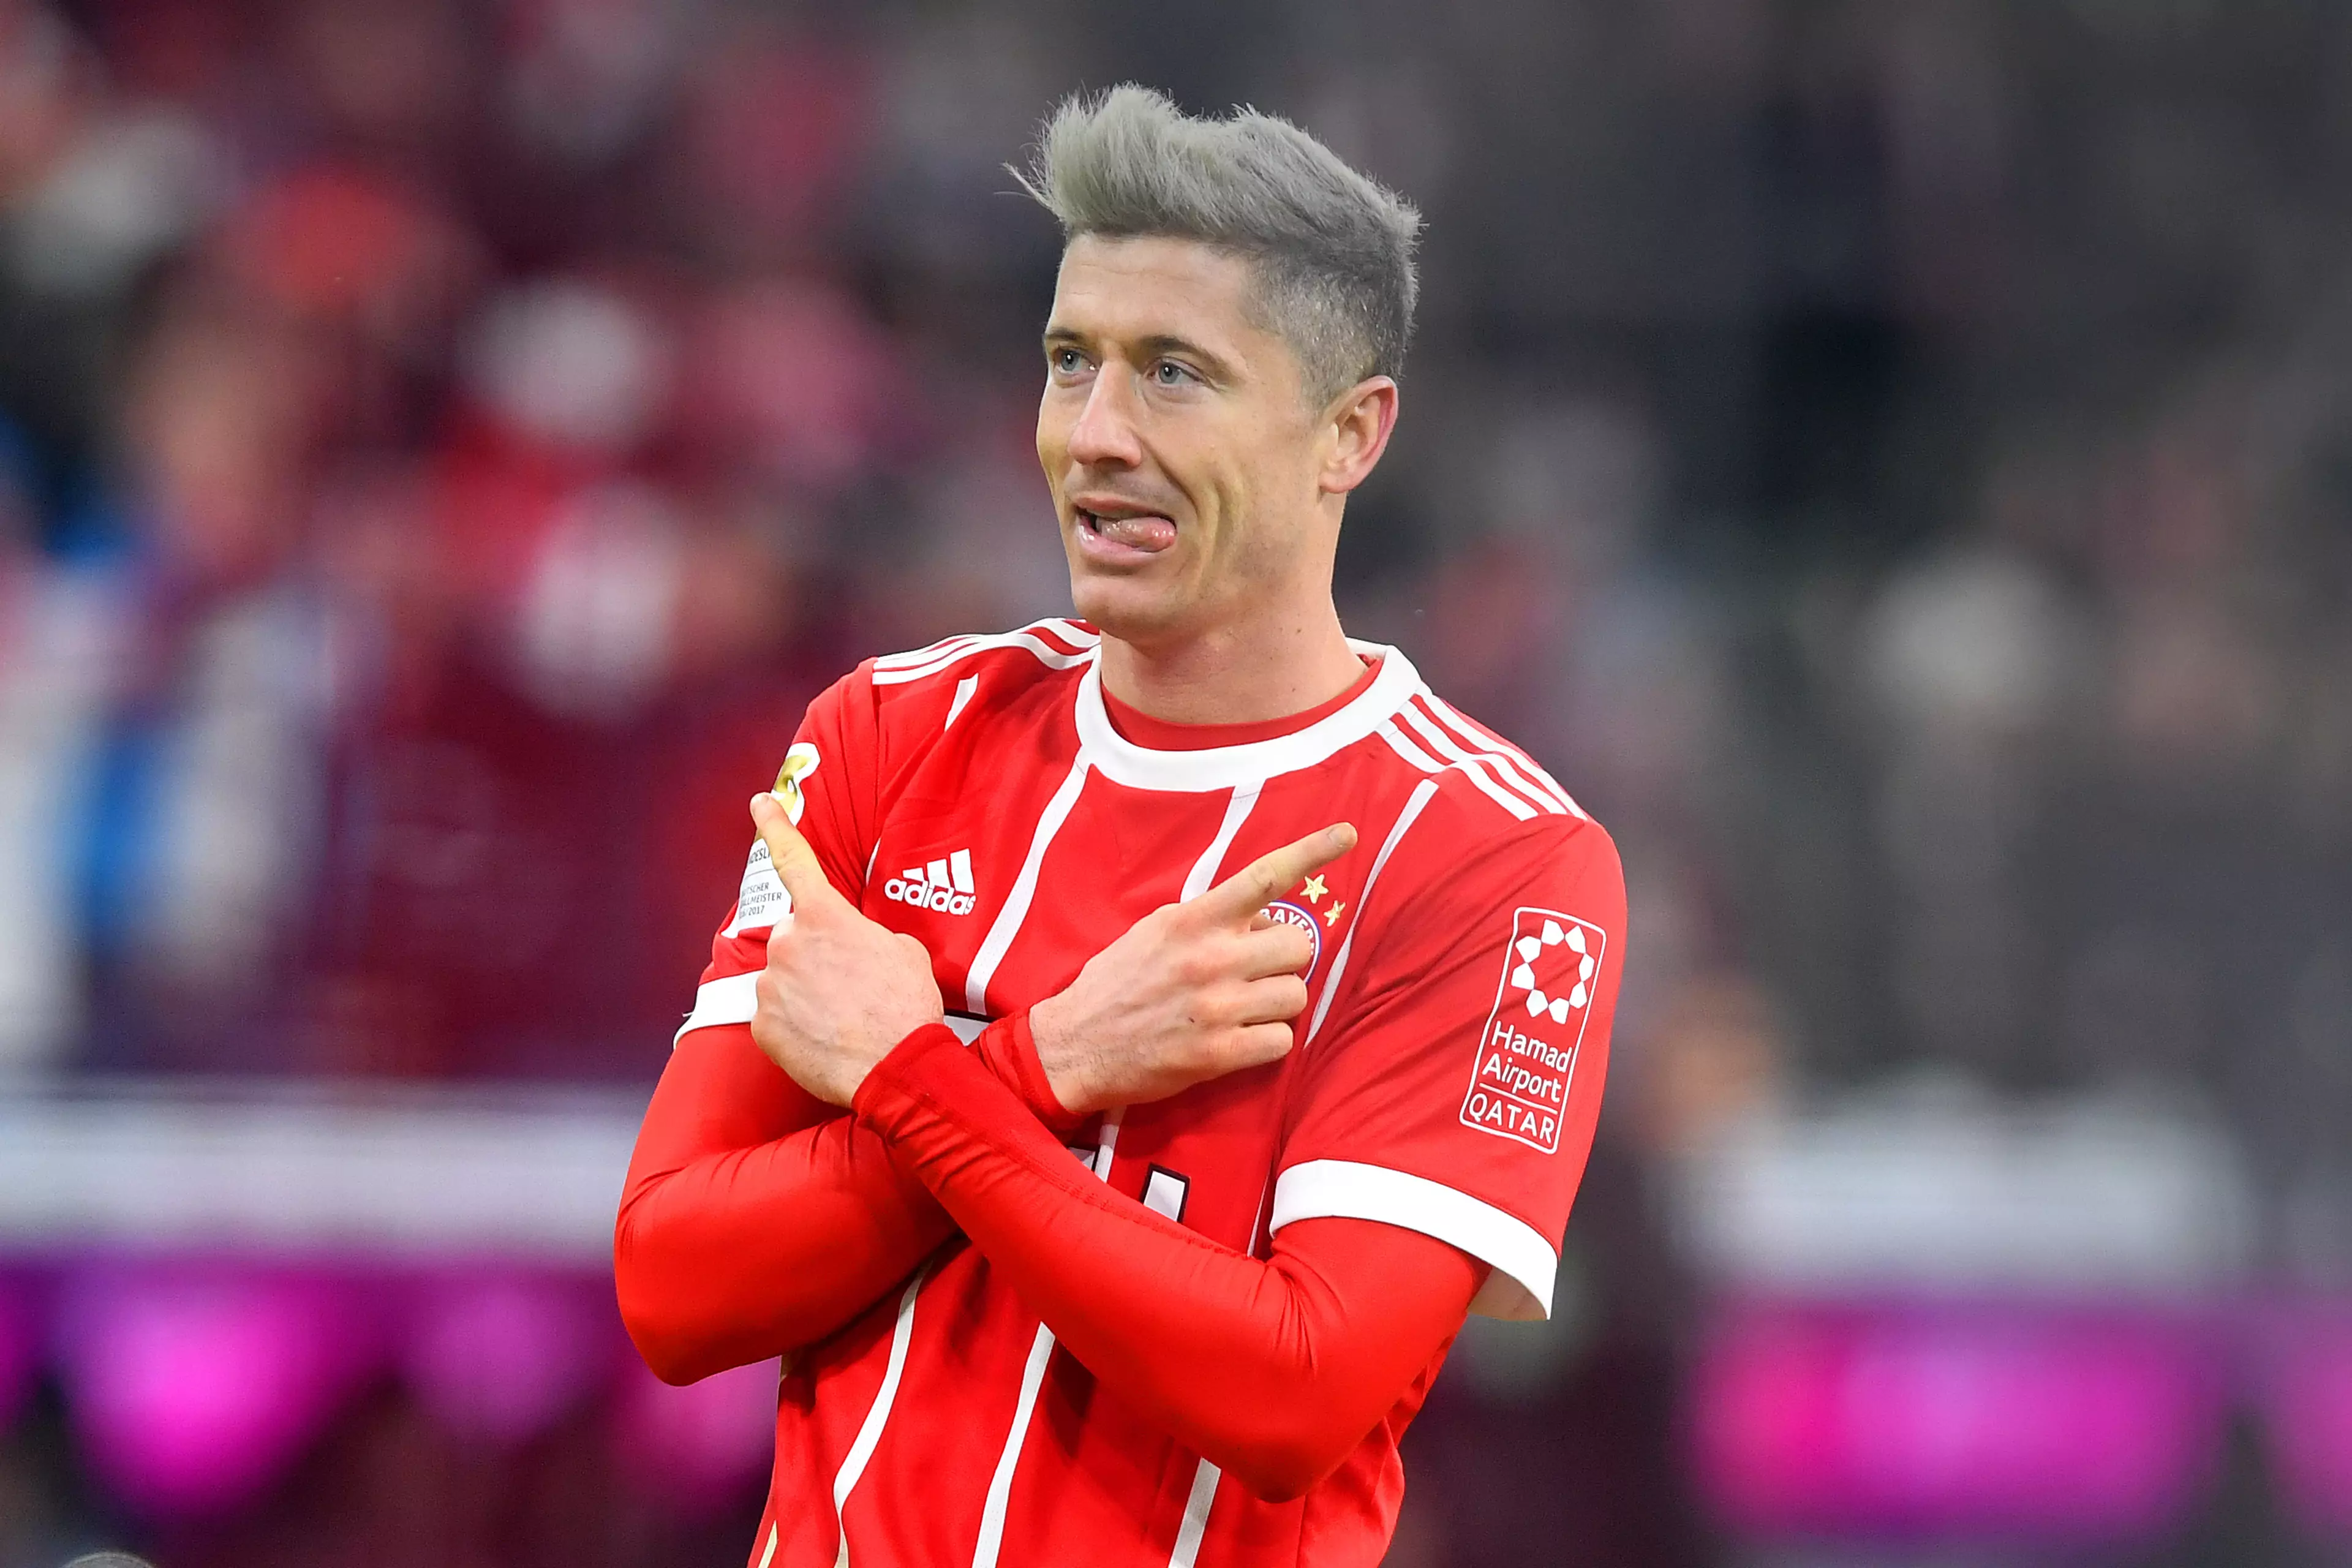 Lewandowski recently got his hair ready for the move. Image: PA